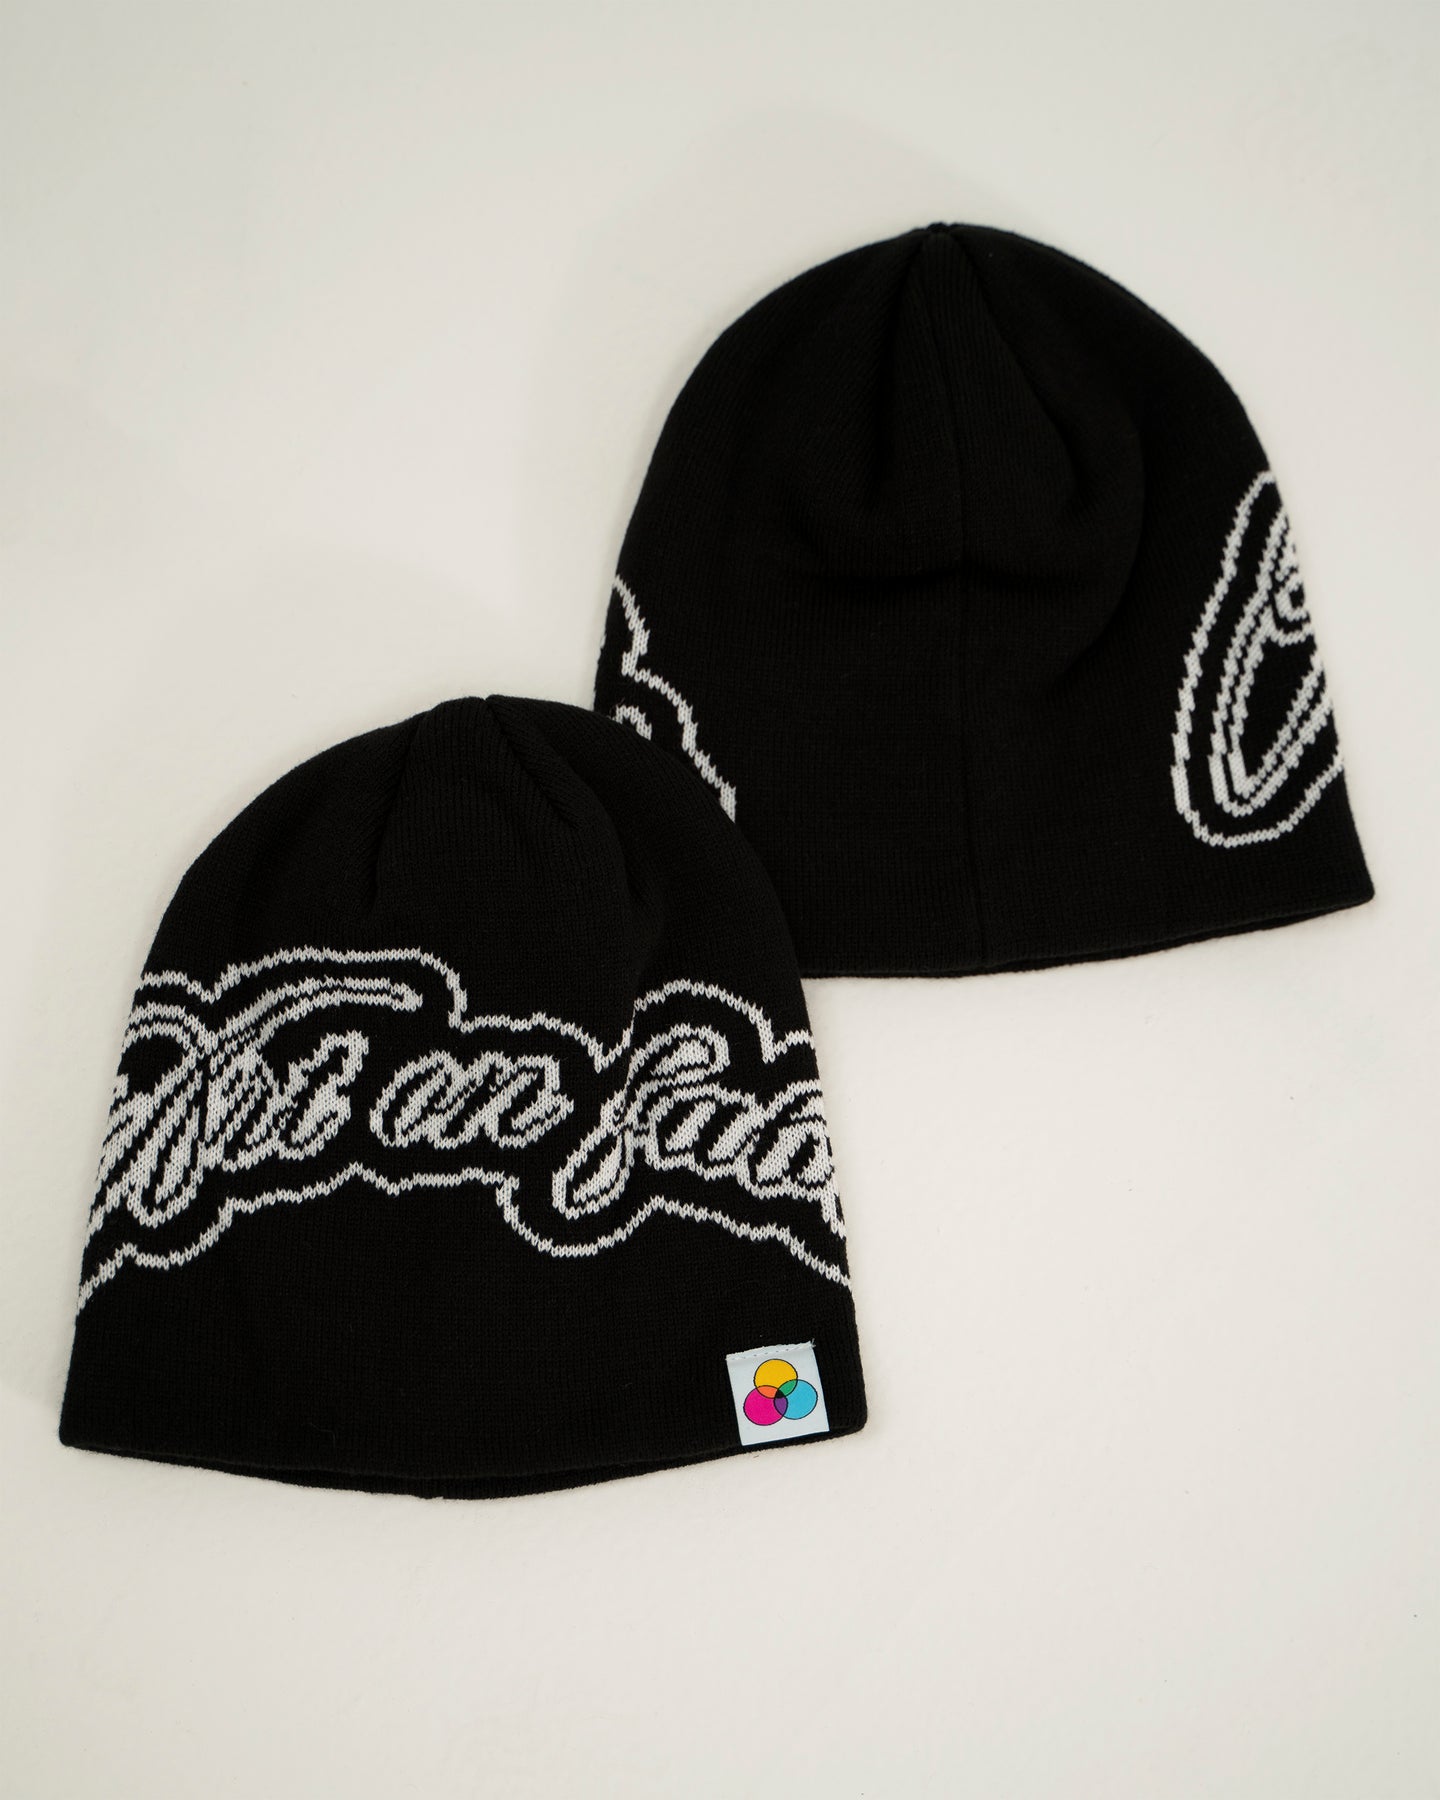 ART PIECE : ARCHED LOGO KNITTED BEANIE BLACK